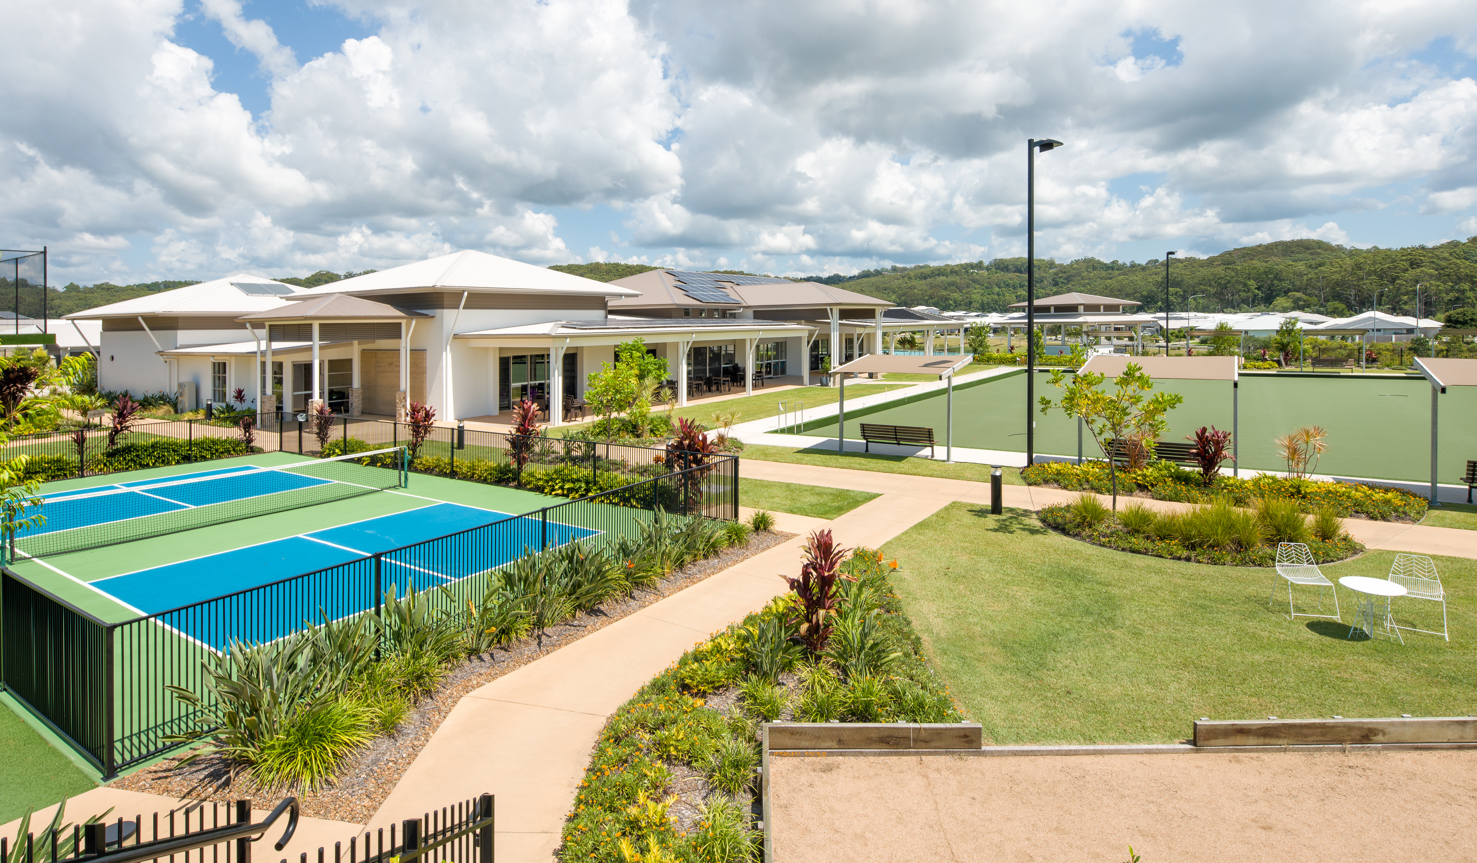 Halcyon Lakeside pickleball courts, lawn bowls green and recreational club 